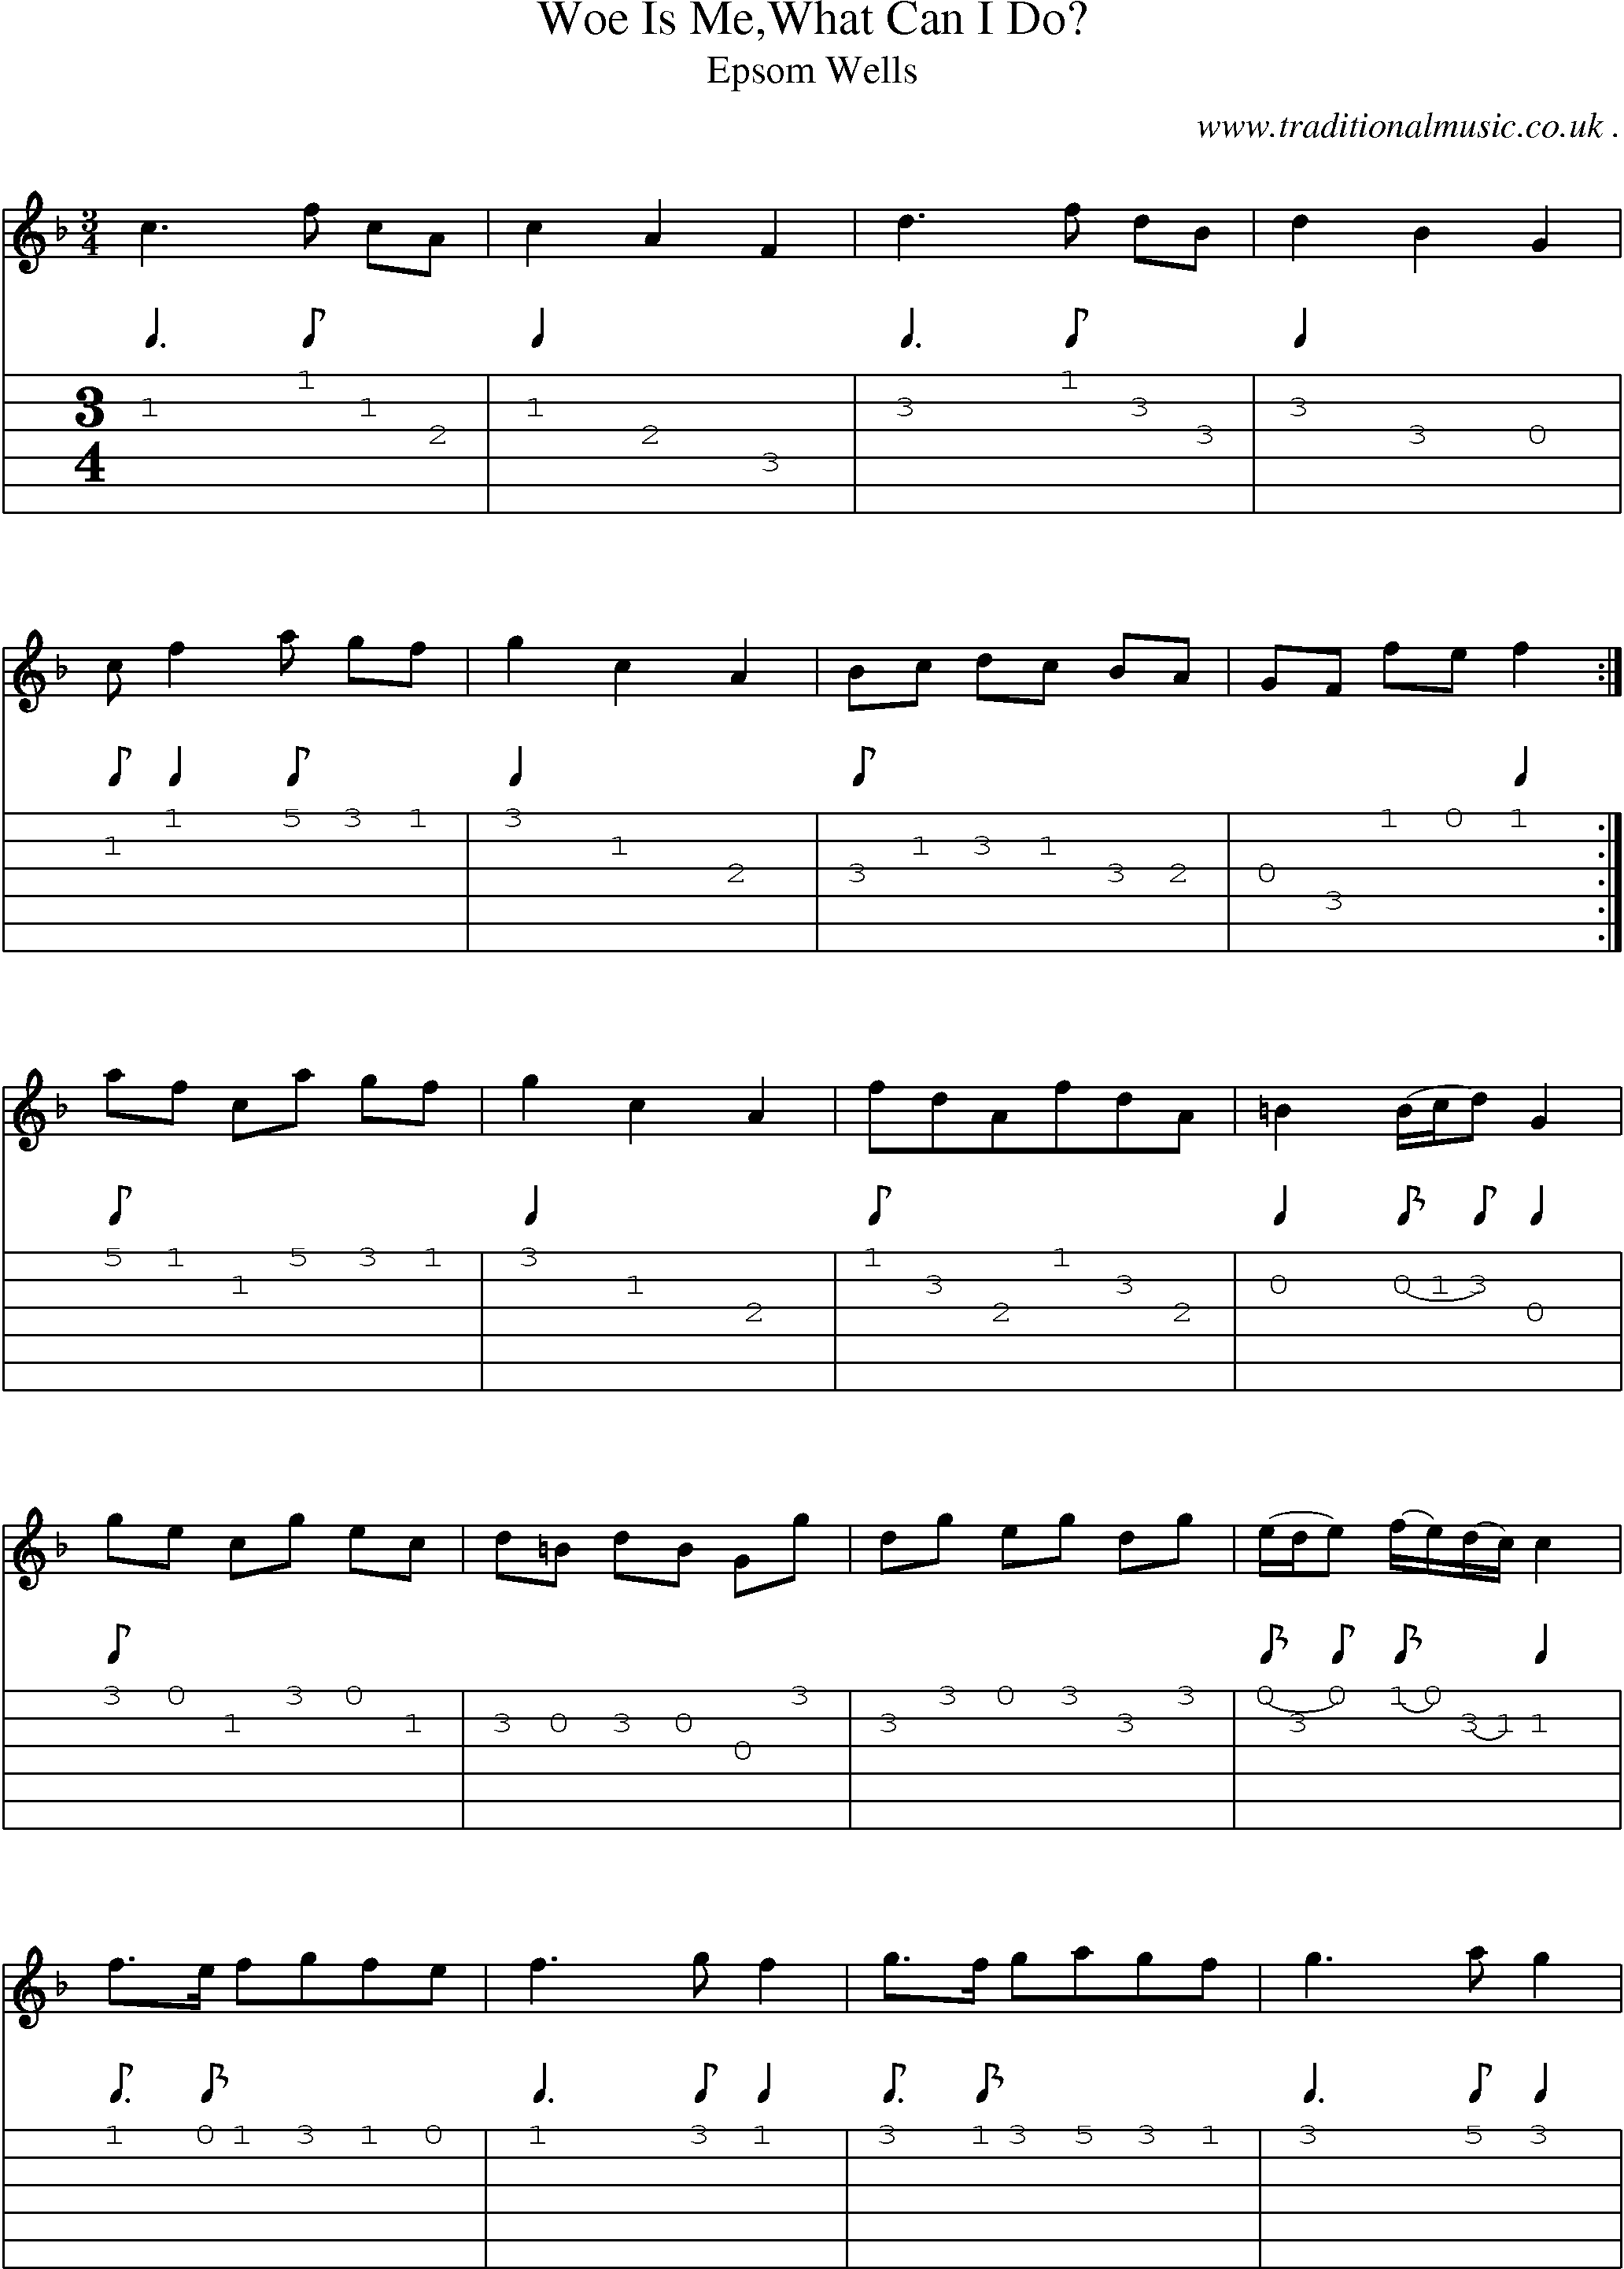 Sheet-Music and Guitar Tabs for Woe Is Mewhat Can I Do